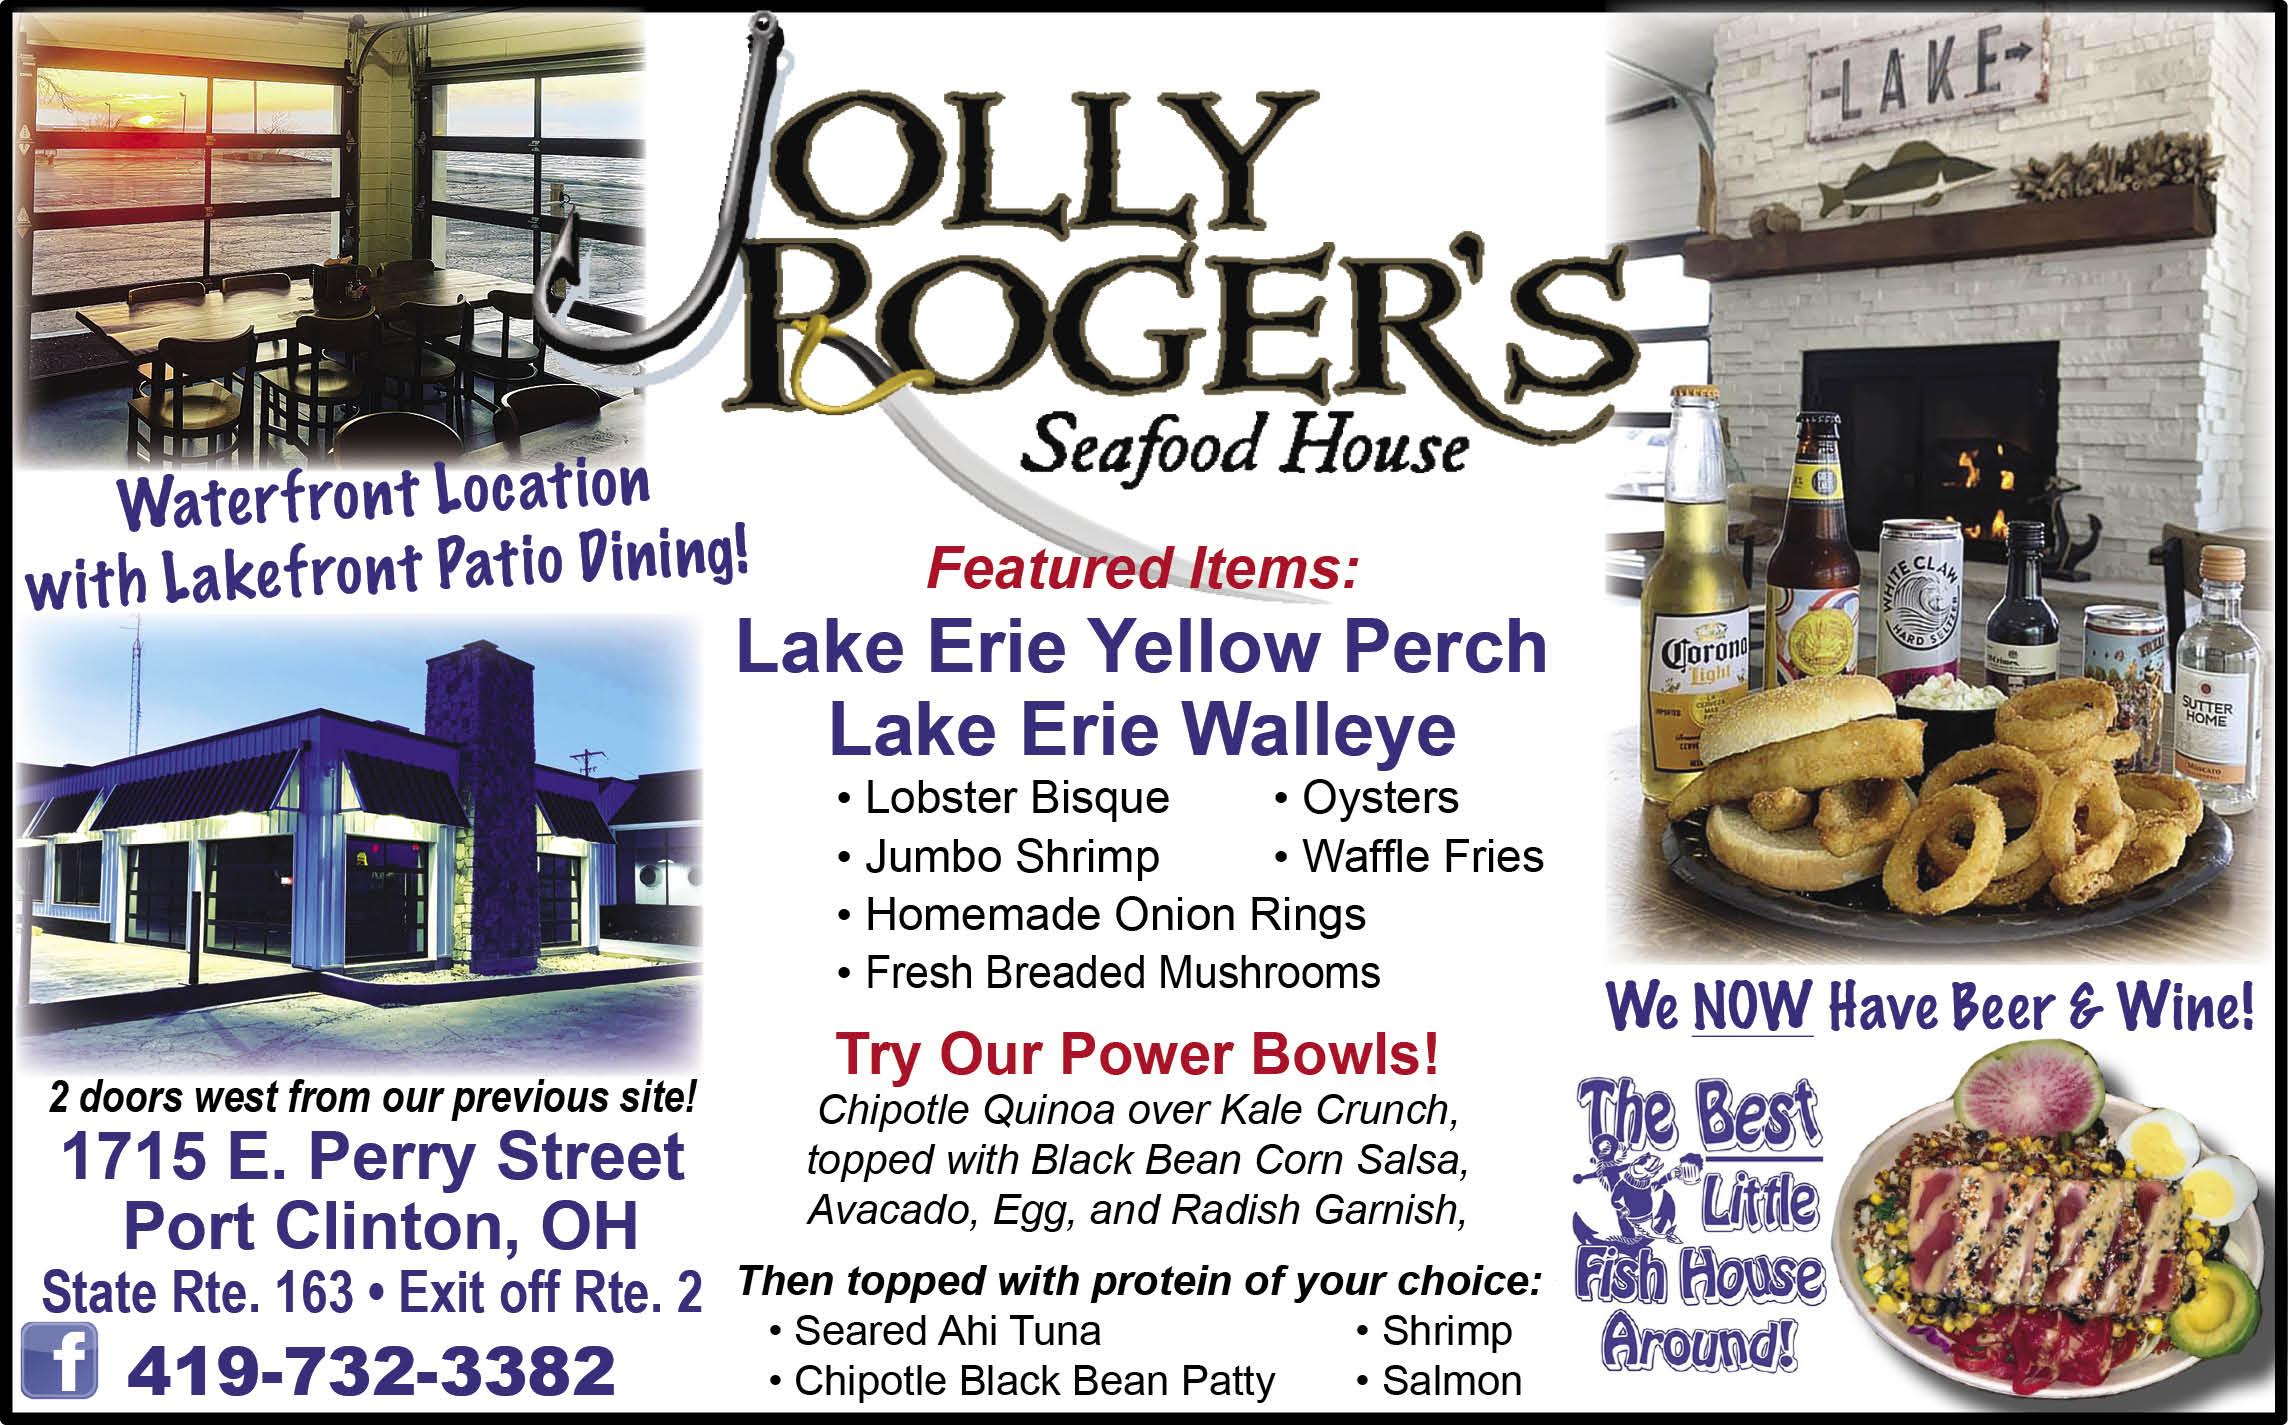 Jolly Roger’s Seafood House